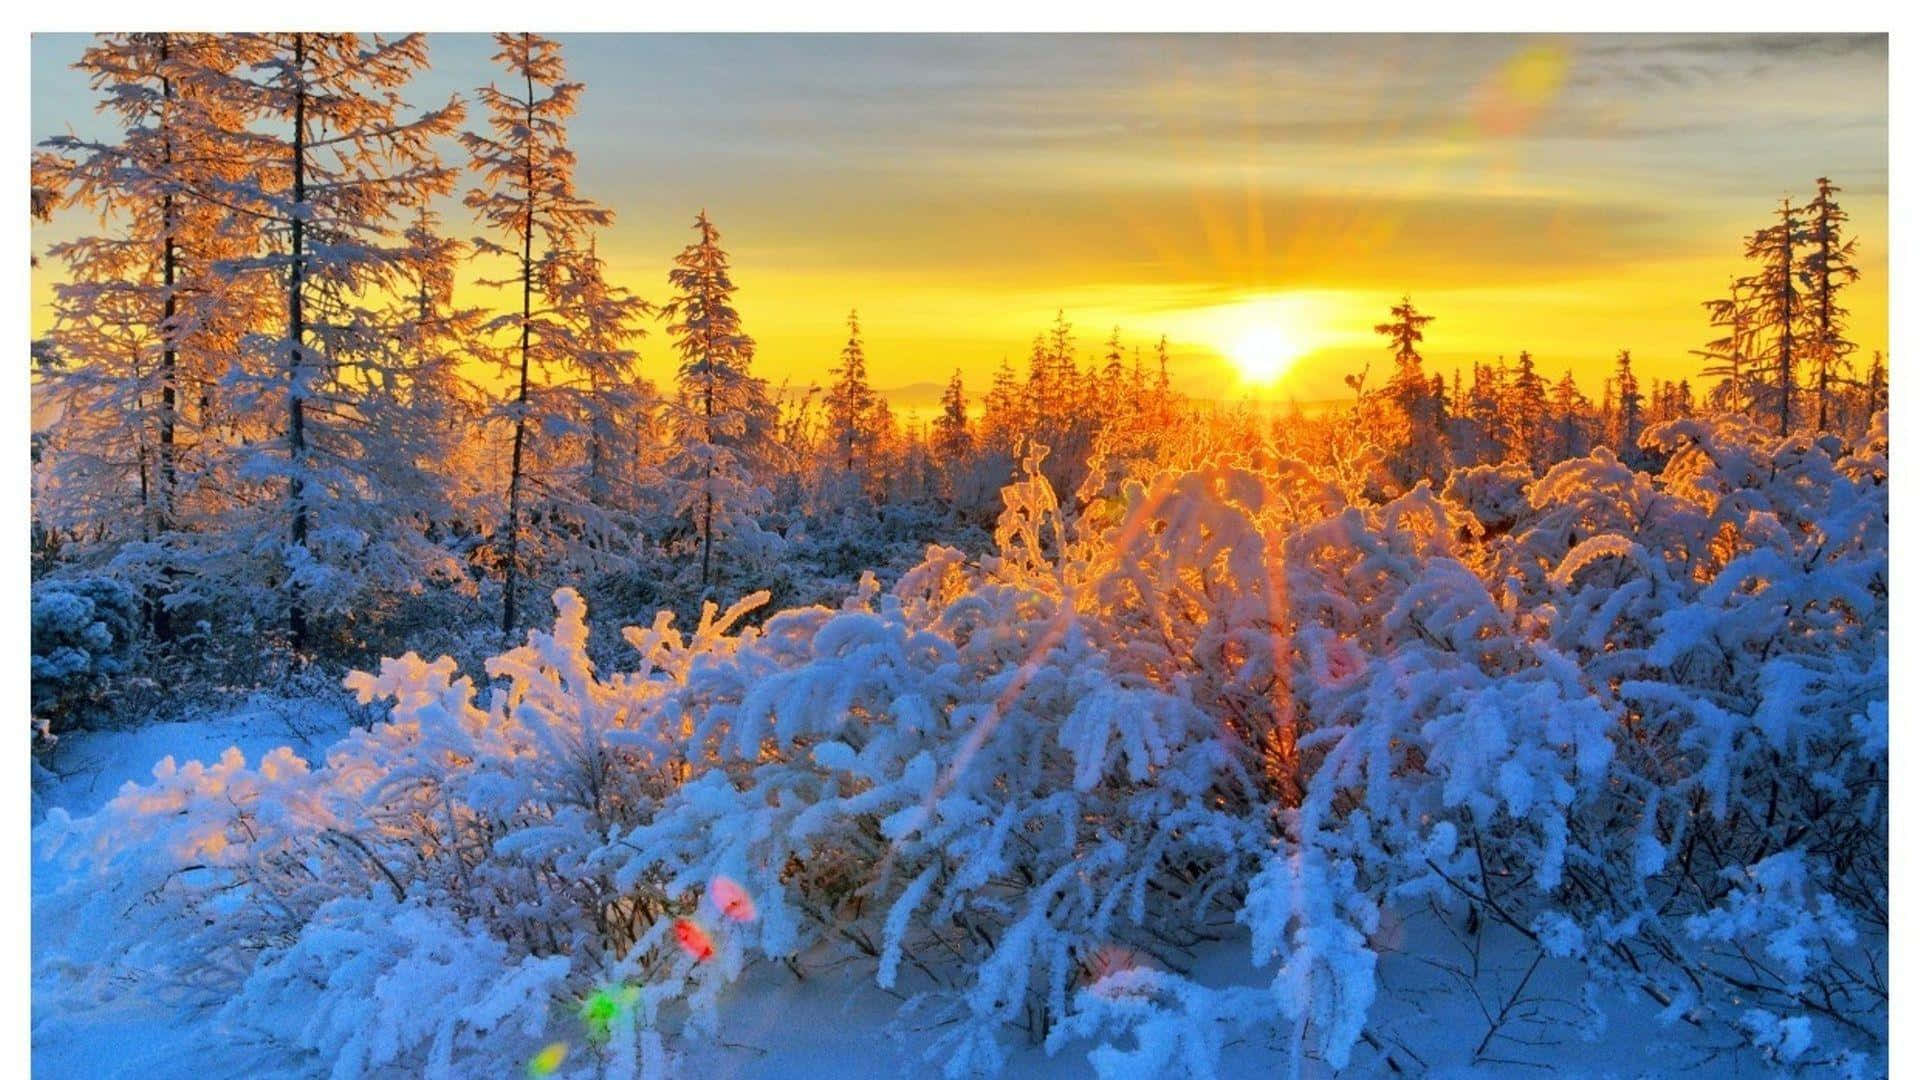 Download Winter Sun Shining Over Snow-Covered Landscape Wallpaper ...